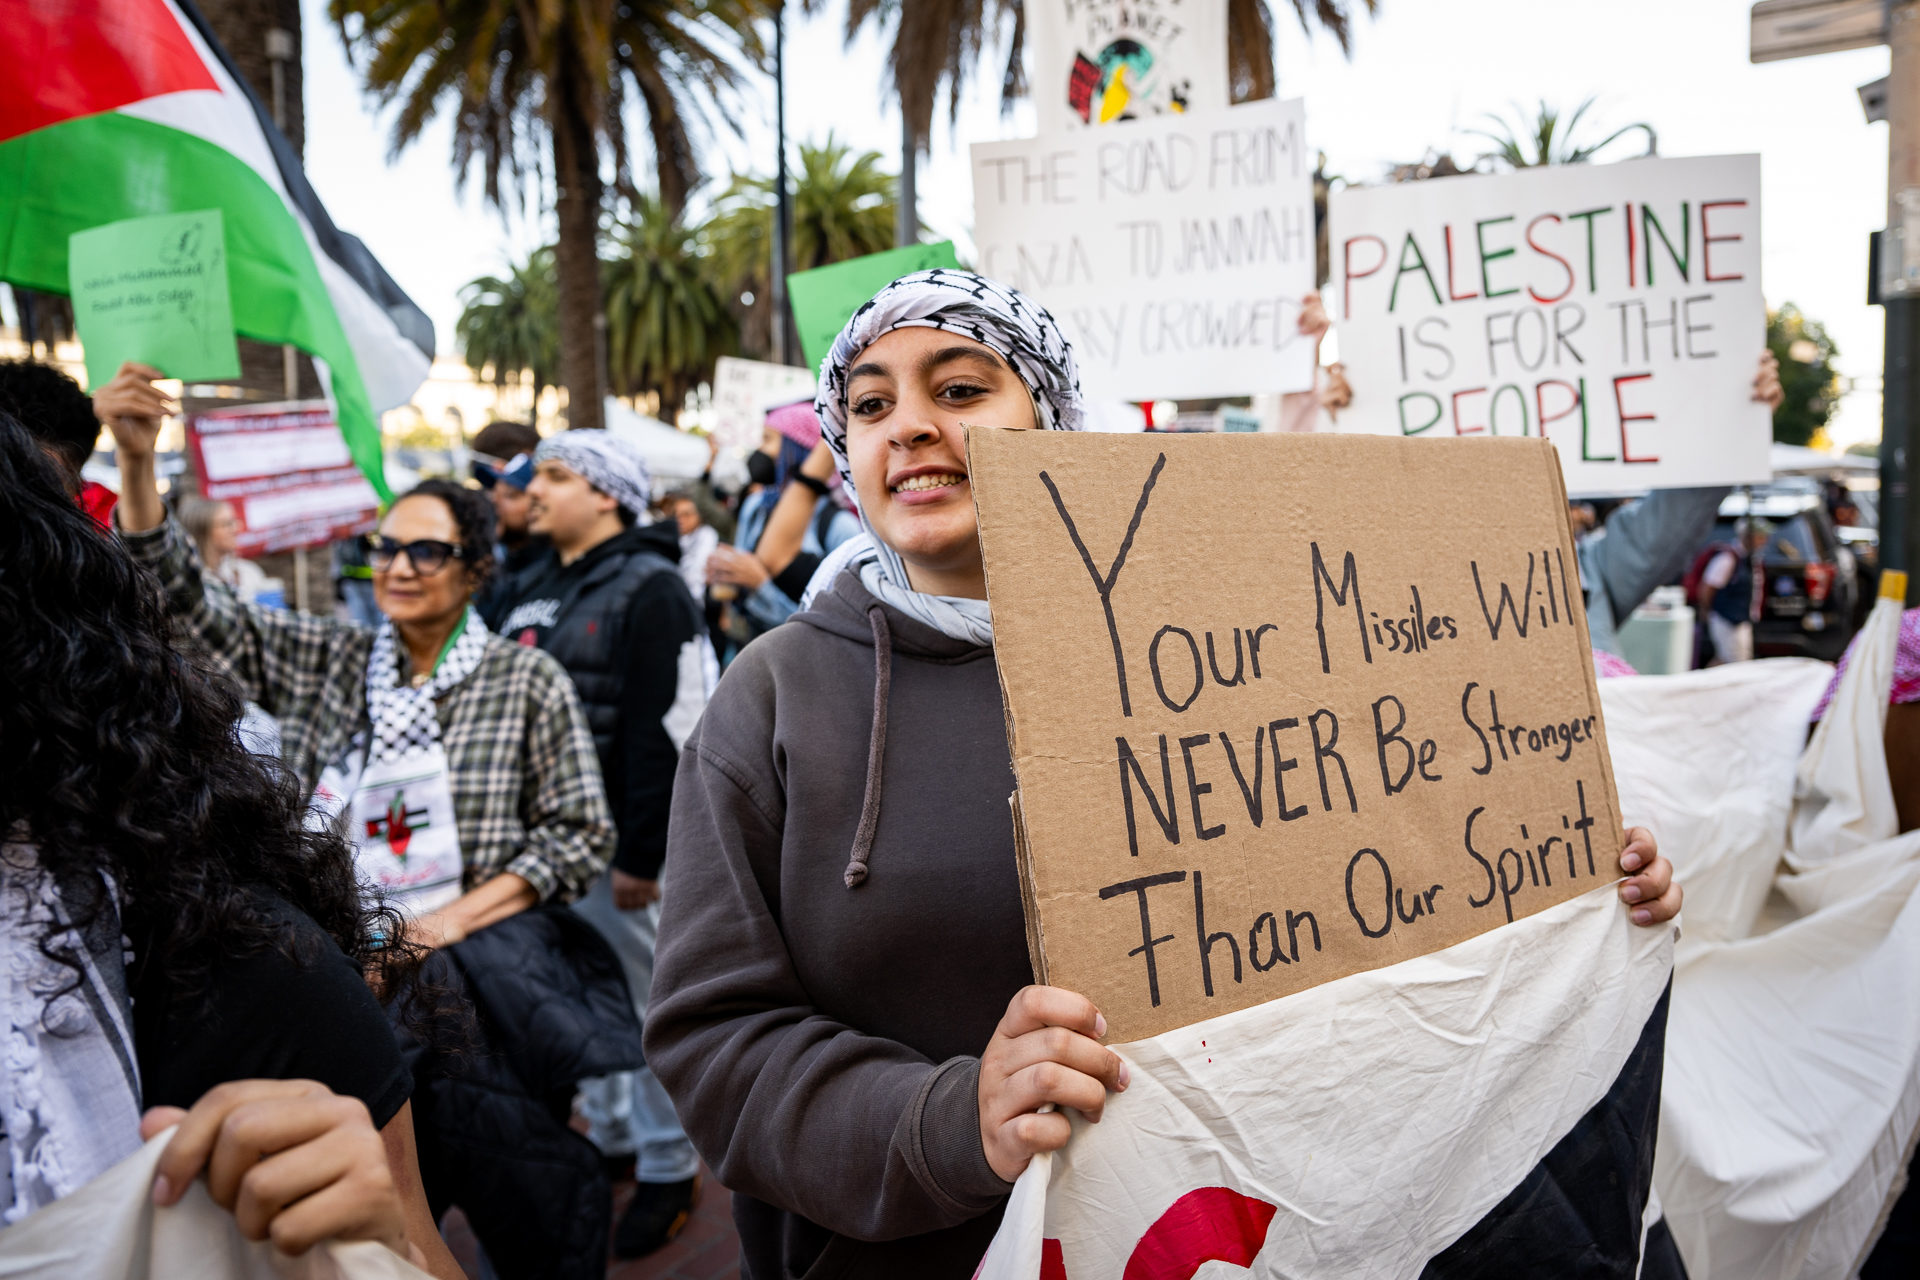 A young woman holds a sign that says "your missiles will never be stronger than our spirit" in a crowd of people.